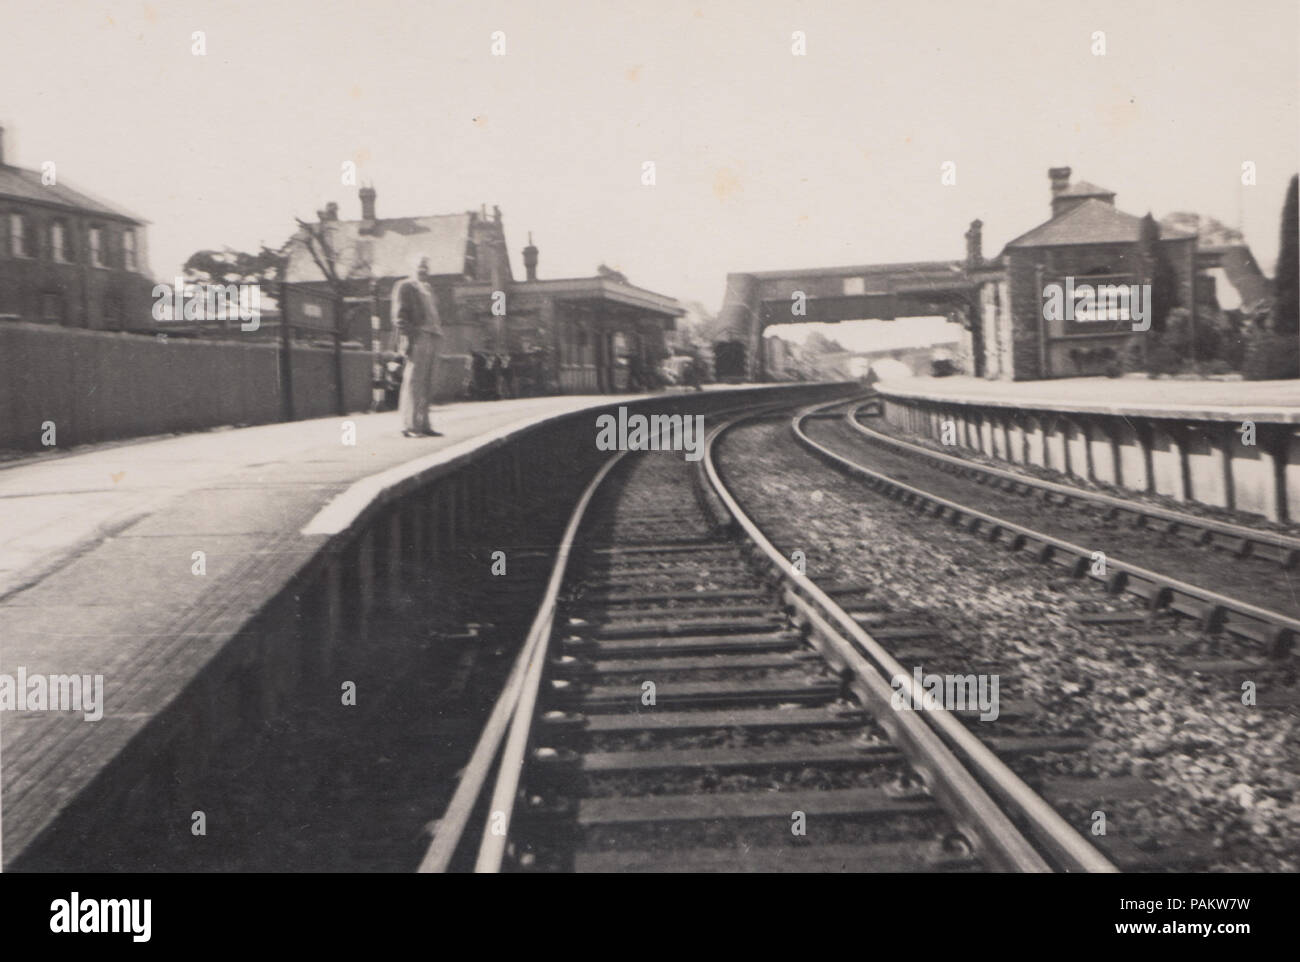 Vintage Photograph of a British Railway Station Stock Photo